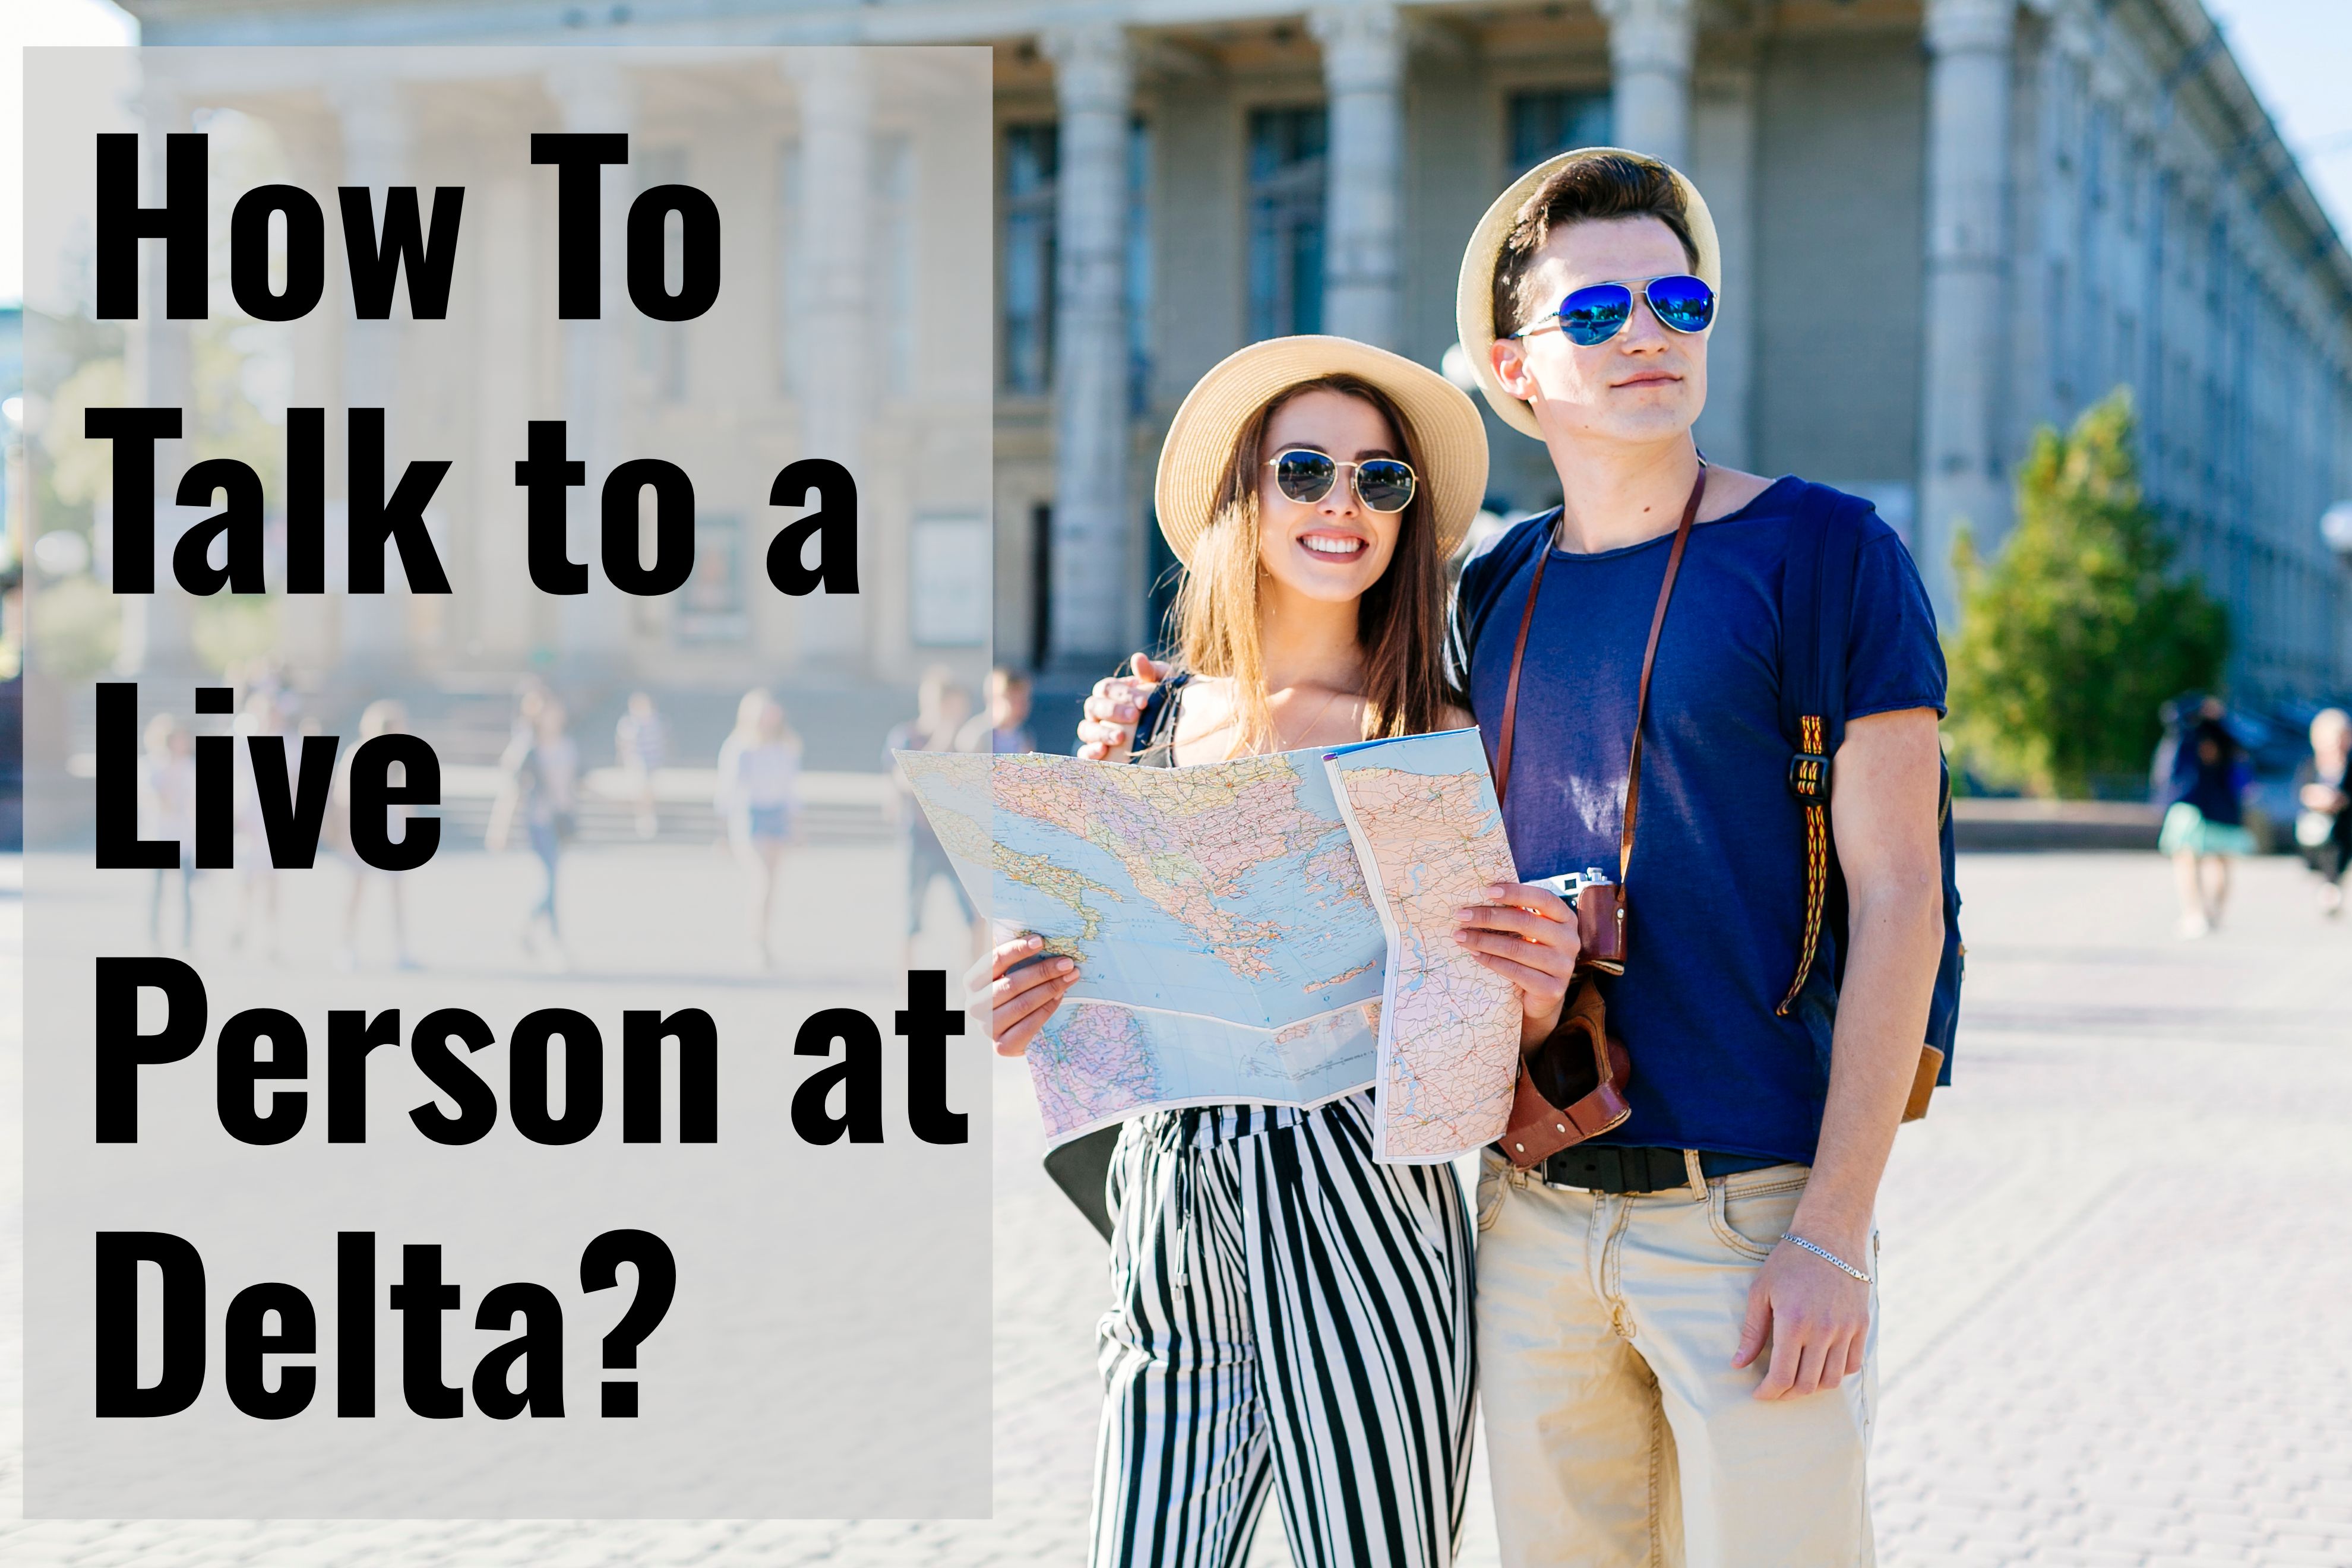 How To Talk to a Live Person at Delta?